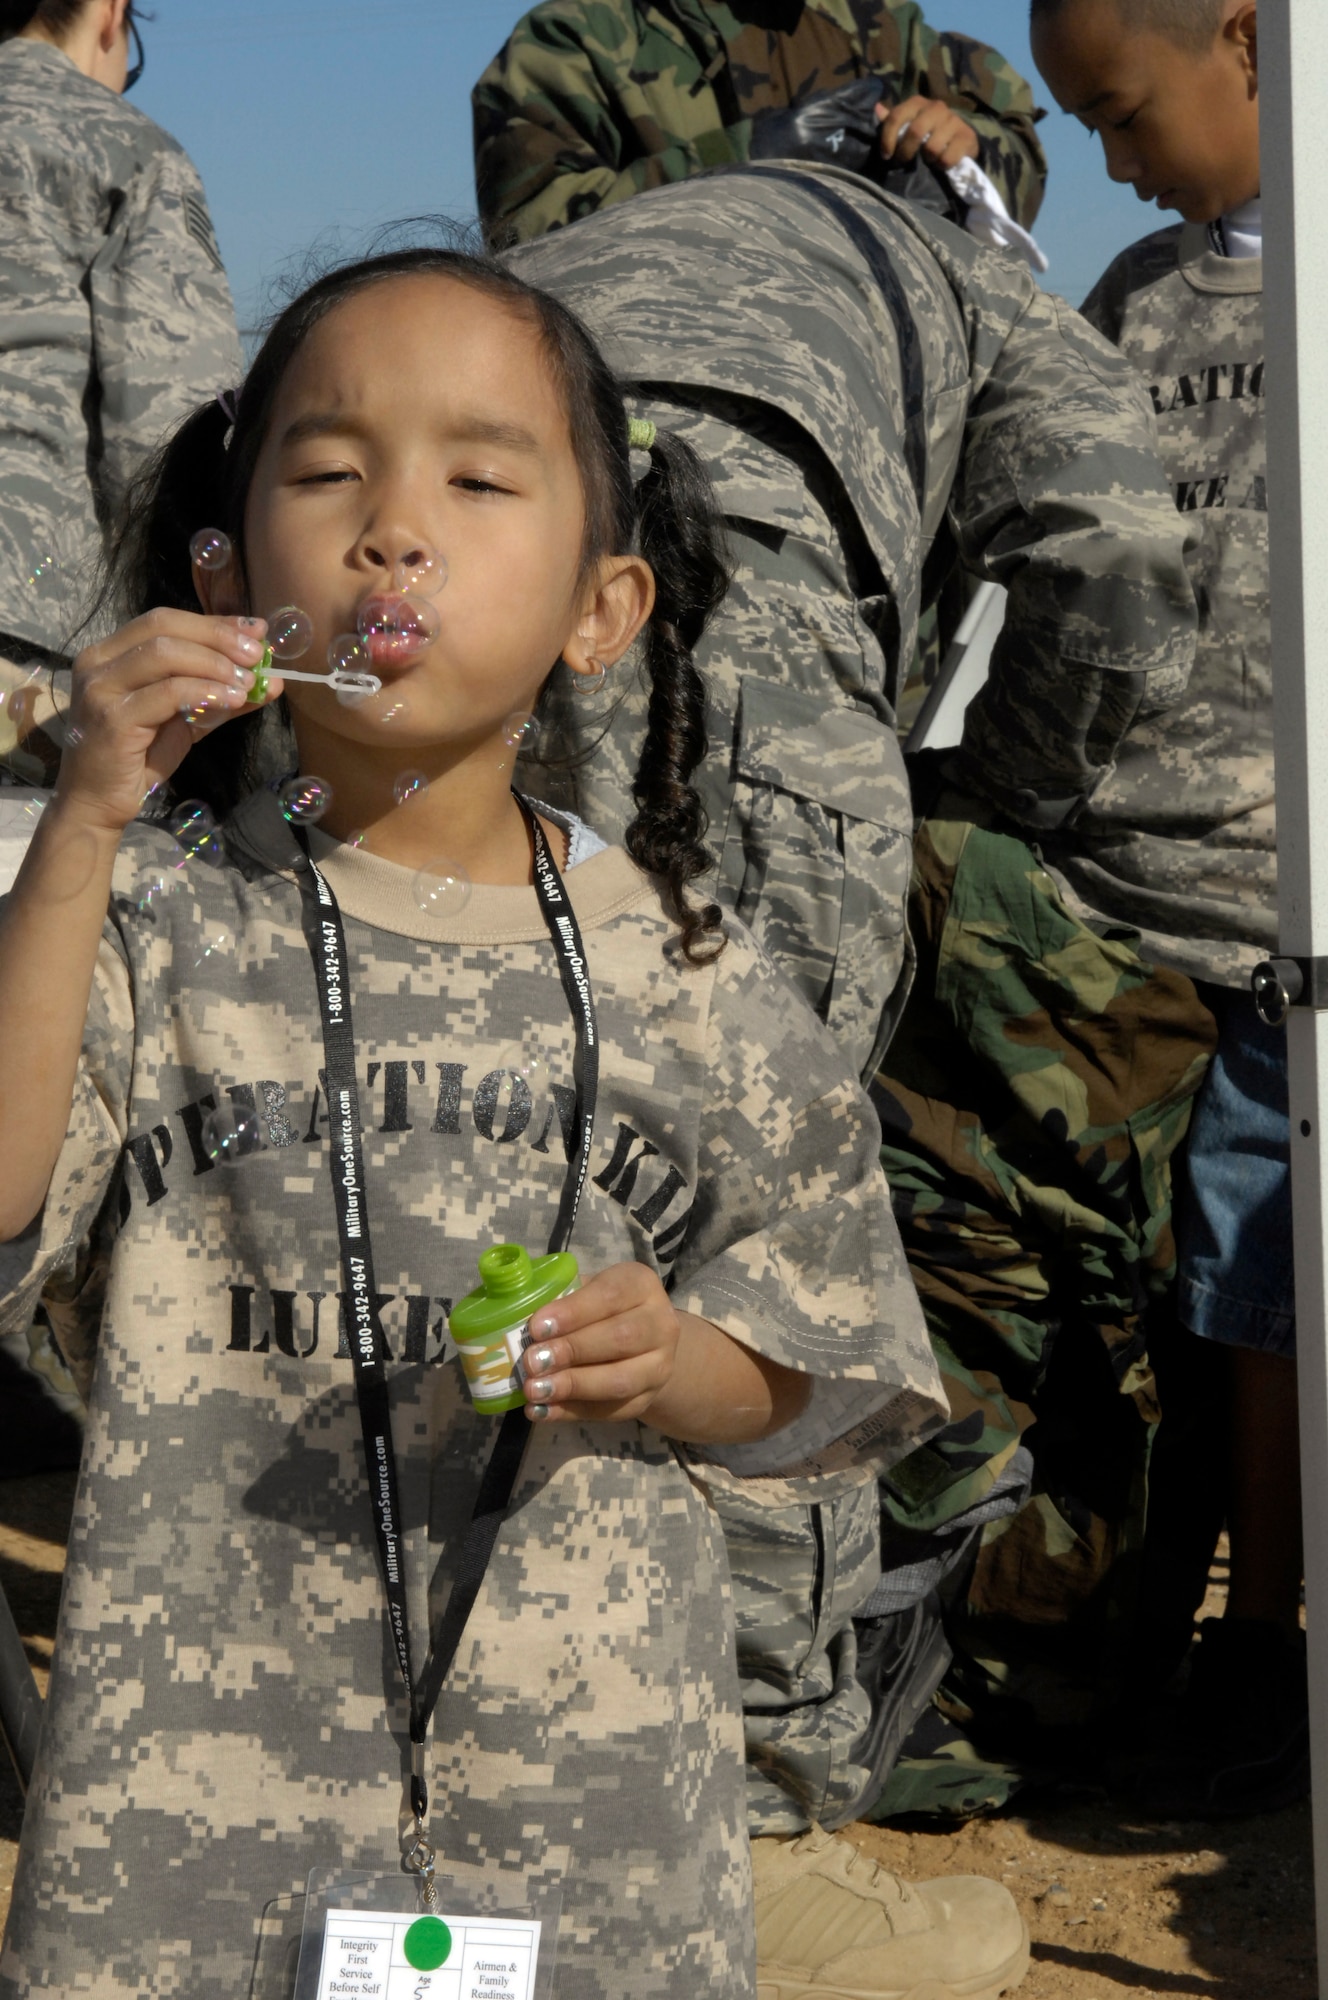 Veronika Brown, 5, takes time to relax and blow bubbles while "deployed" in support of the 2009 Operation Kids event, Oct. 24, 2009, Luke Air Force Base, Arizona. (U.S. Air Force Photo by Staff Sgt. Jason Colbert)